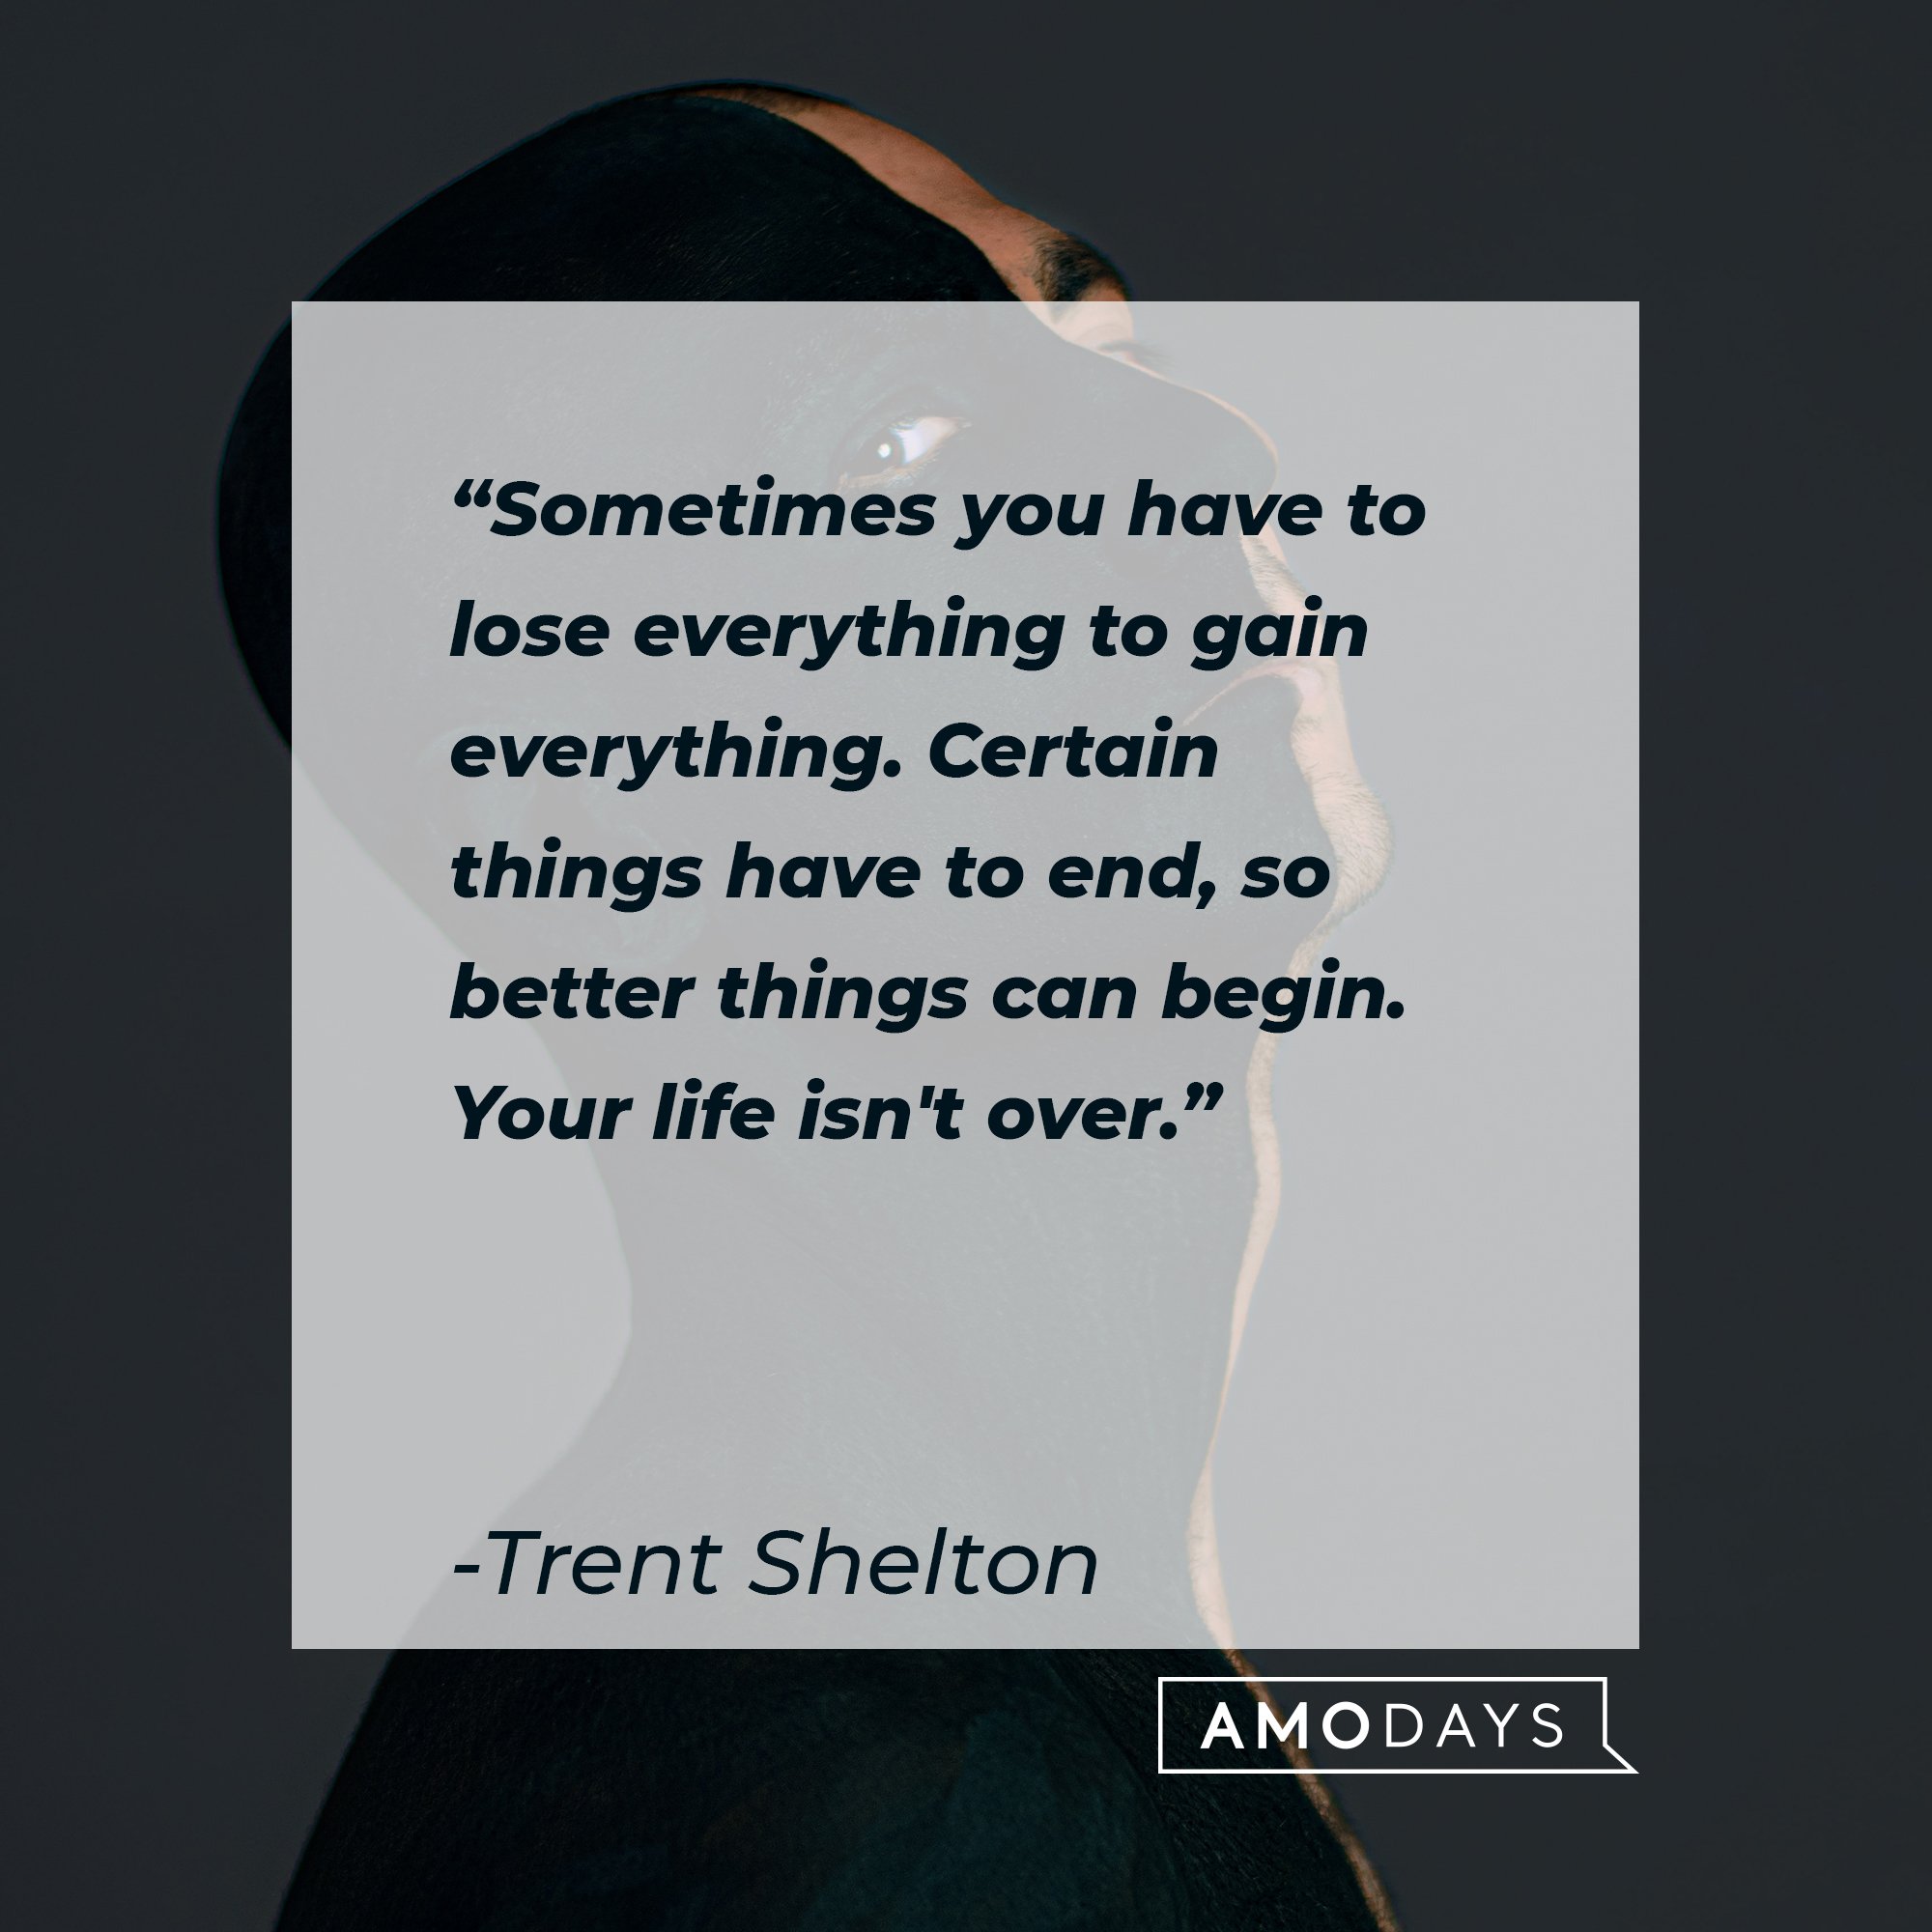 Trent Shelton's quote: "Sometimes you have to lose everything to gain everything. Certain things have to end, so better things can begin. Your life isn't over."  | Image: AmoDays